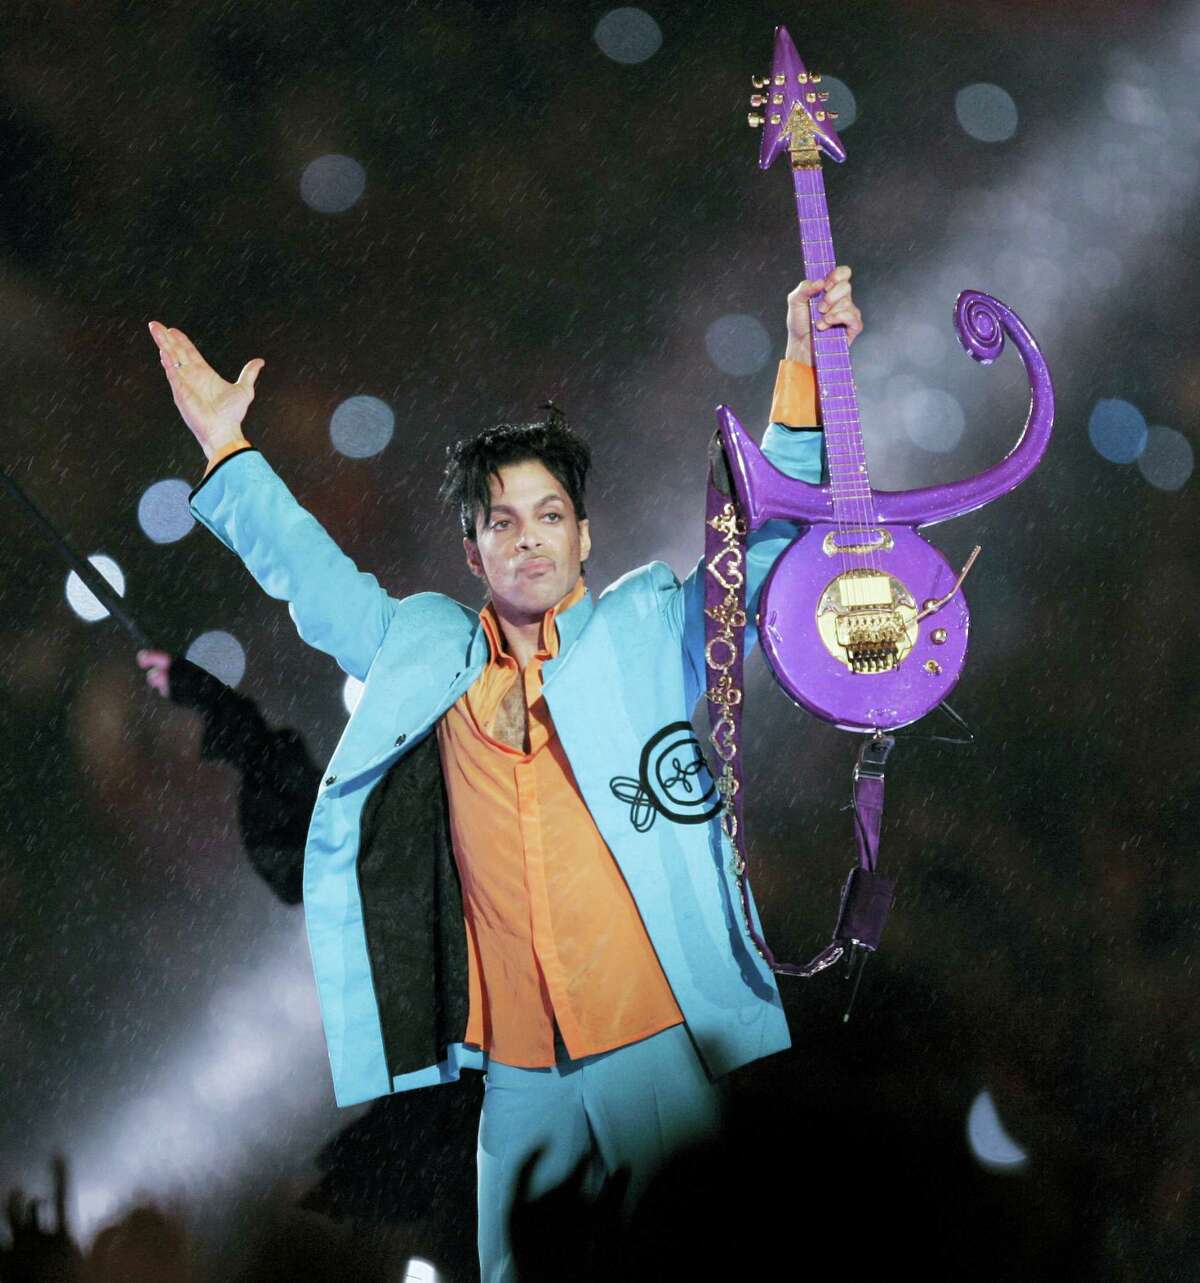 In this Feb. 4, 2007 photo, Prince performs during halftime of the Super Bowl XLI football game in Miami. A hearing will be held Monday, June 27, 2016 in suburban Minneapolis about the procedures for determining who stands to inherit part of Prince’s estate.